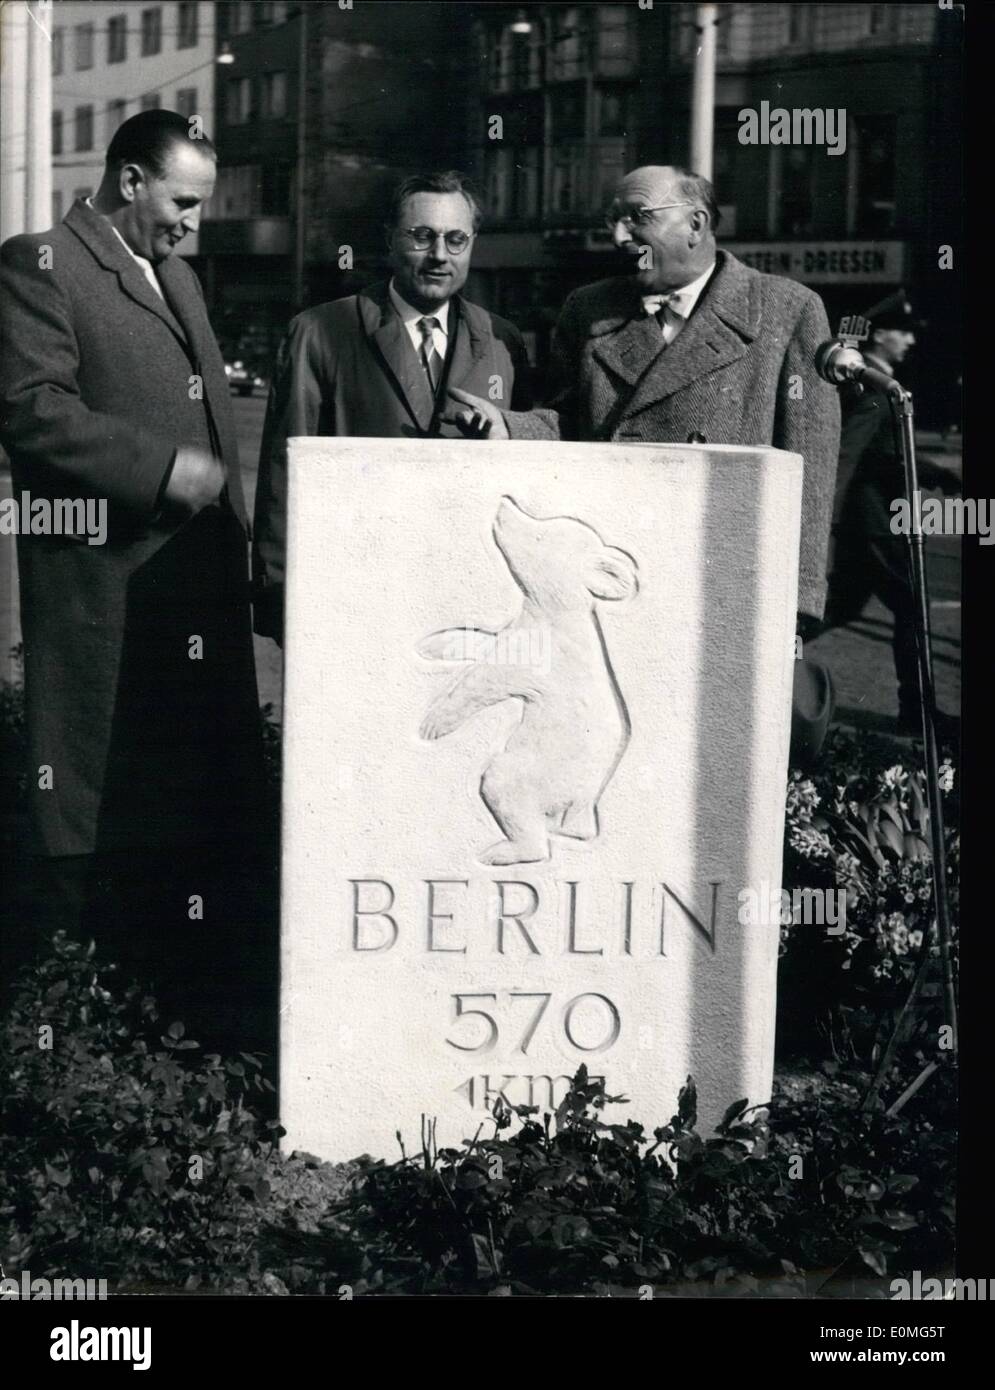 Apr. 04, 1955 - Bonn to Berlin 570 kilometer: At the Rhine-bridge of Bonn, half a way from Paris to Berlin on that street leading from the Seine and Marne, Maas and Mosel to the Elbe and Havel, the first Berlin milestone on the left side of the Rhine was inaugurated by (left-right) Mayor Stelling (Stelling-Bonn), Mp Dr. Gerd Bucerius (Bucerius-deputy fir help of Berlin economy) and the reigning mayor of Berlin Dr. Suhr (Suhr) Stock Photo